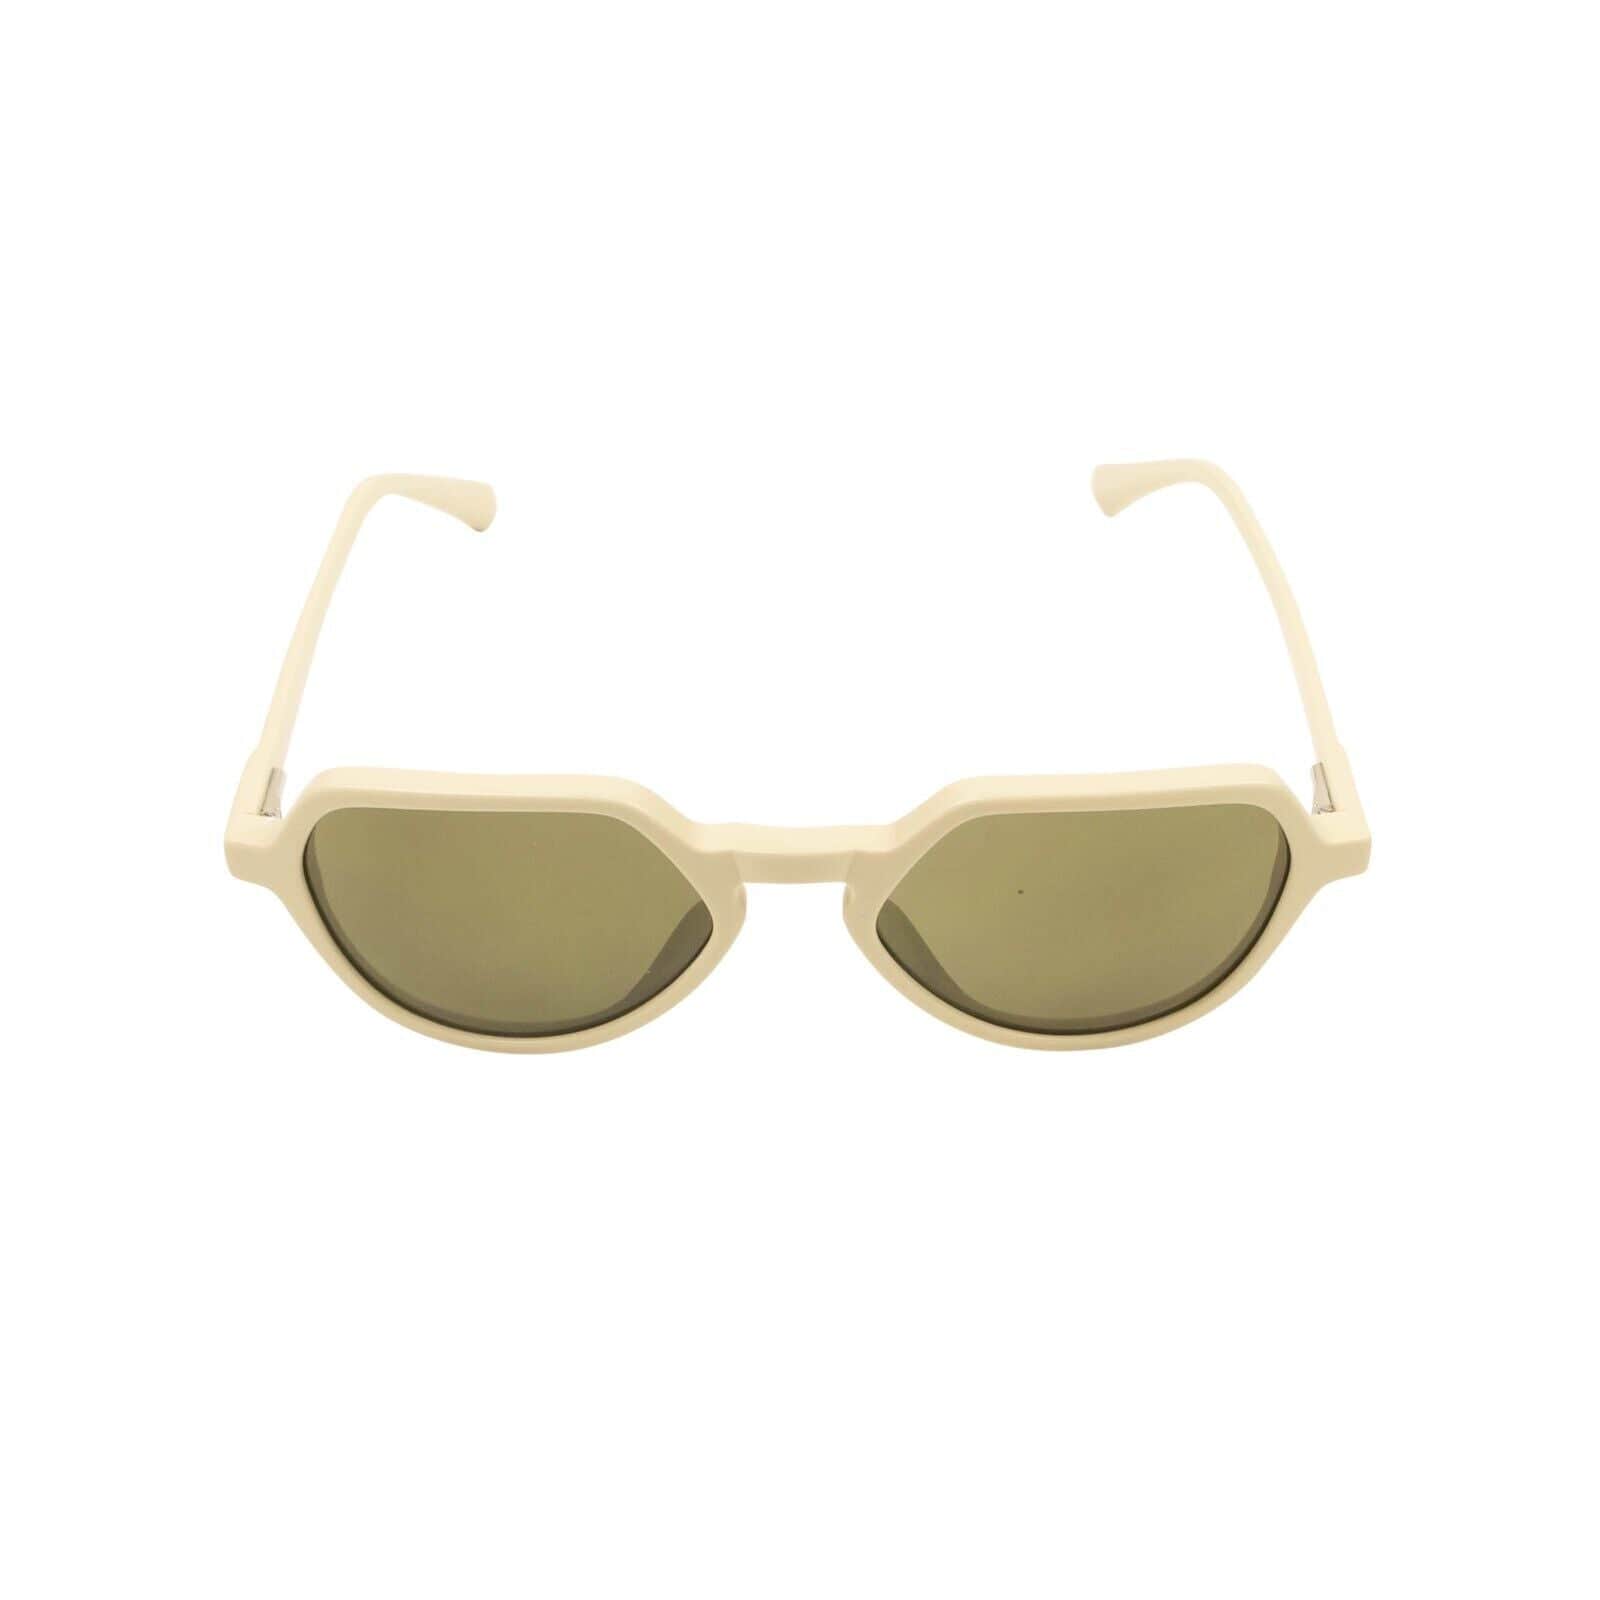 Dries Van Noten x Linda Farrow Vinatge channelenable-all, chicmi, couponcollection, dries-van-noten-x-linda-farrow-vinatge, gender-mens, gender-womens, main-accessories, mens-shoes, size-os, under-250, unisex-eyewear OS Ivory Sunglasses 95-DLF-3002/OS 95-DLF-3002/OS